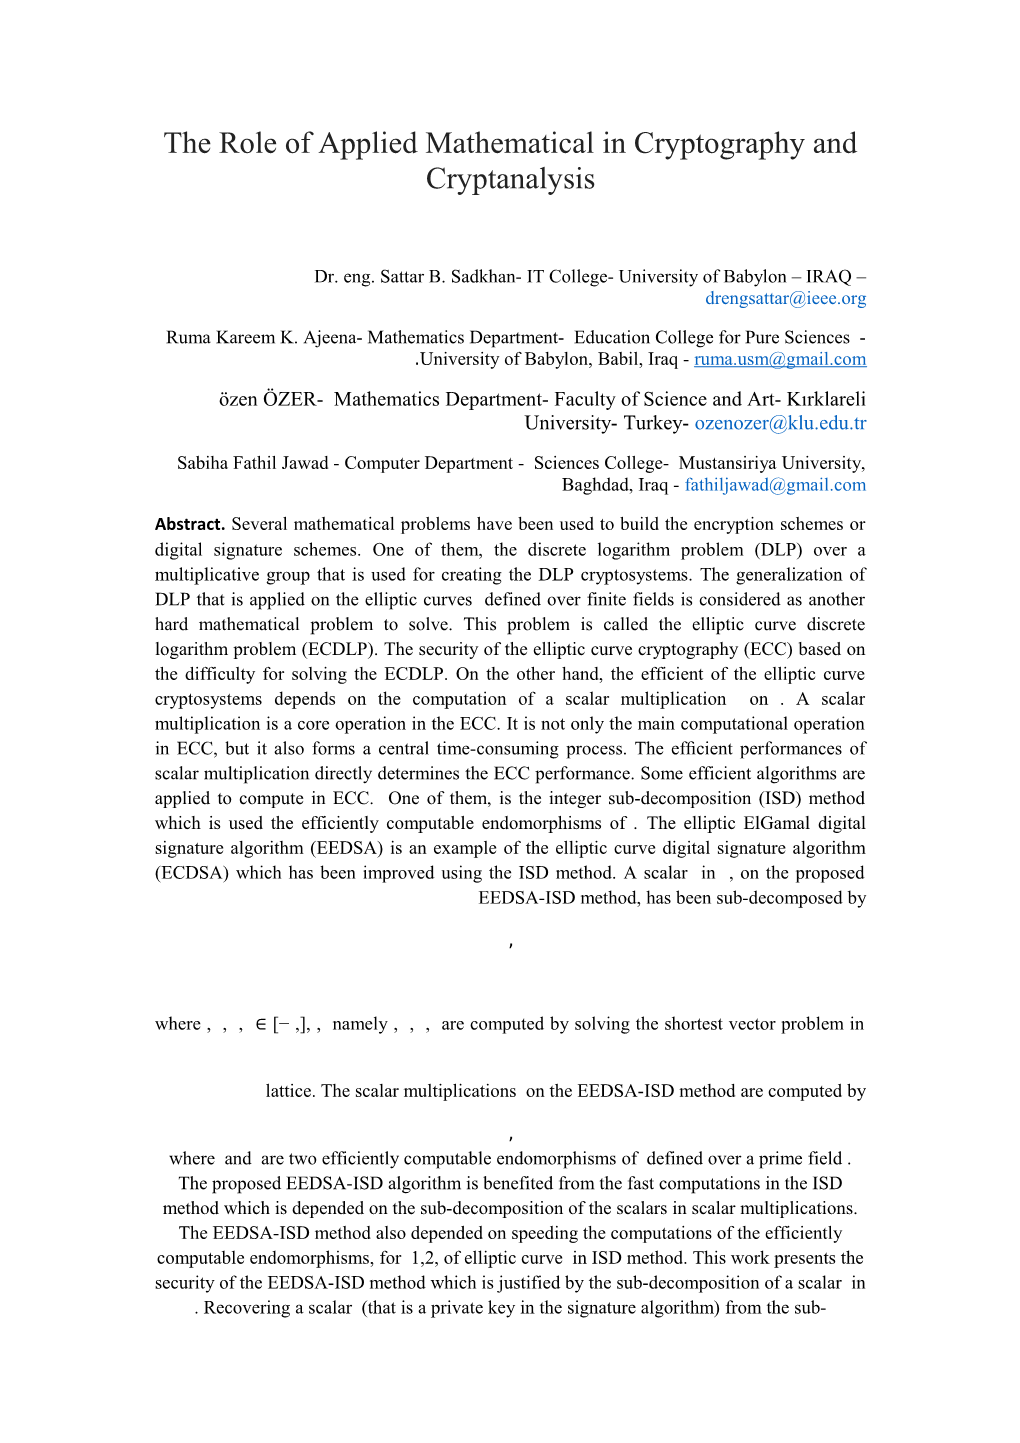 The Role of Applied Mathematical in Cryptography and Cryptanalysis